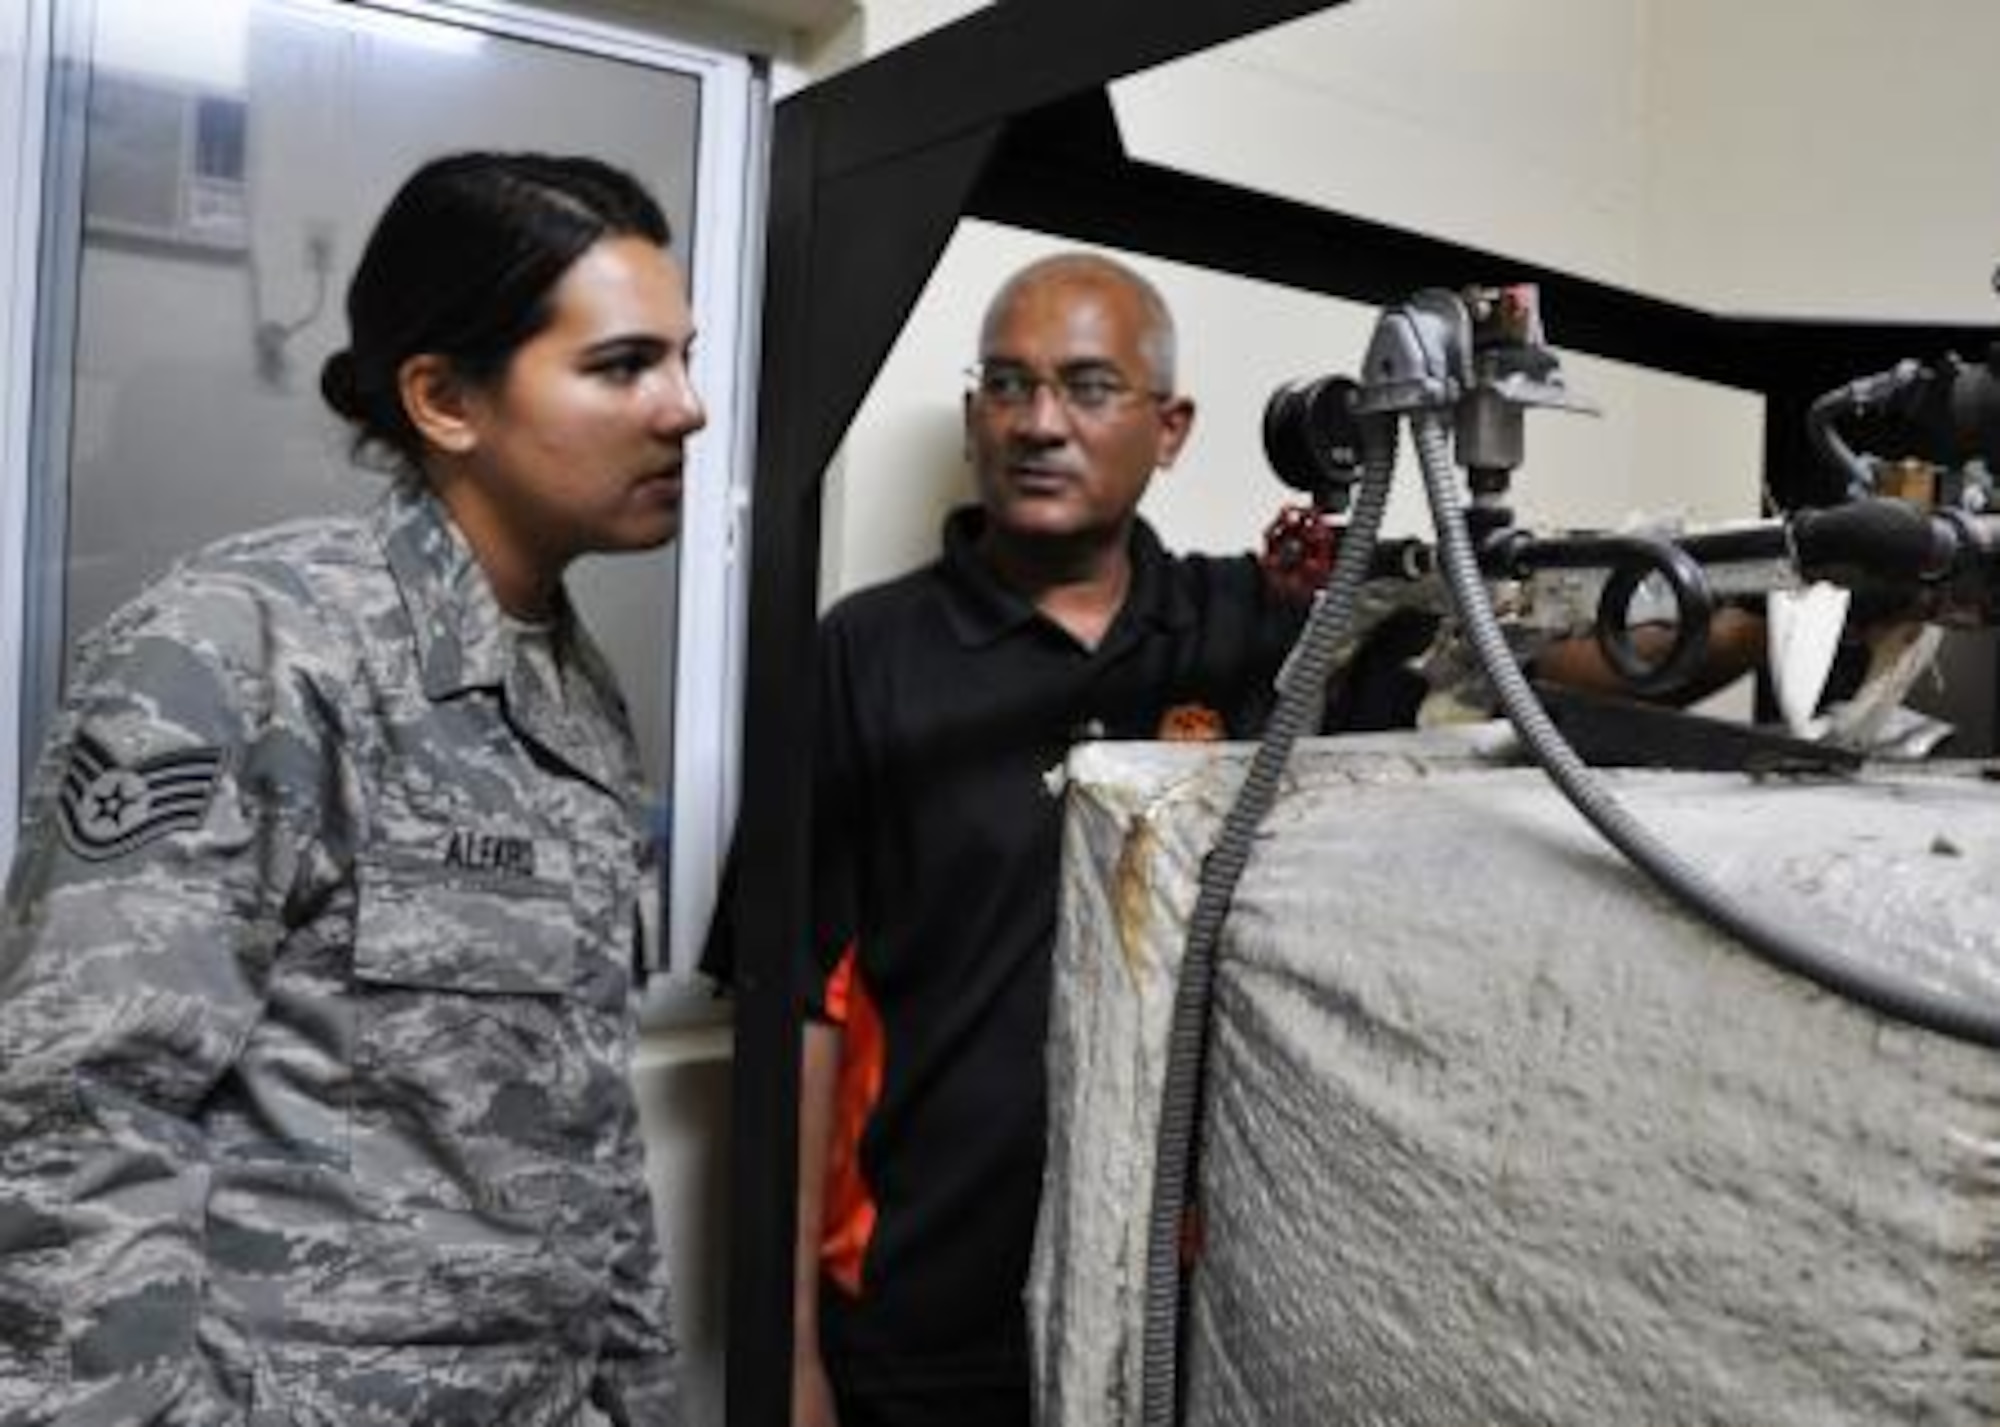 U.S. Air Force Staff Sgt. Rosalinda Alfaro, biomedical equipment technician from the 59th Medical Wing at Wilford Hall Ambulatory Surgical Center at Lackland Air Force Base, Texas, speaks with Roy Mencias, biomedical technician for the Northern Regional Hospital, regarding the hospital’s steam sterilizer June 6, in Orange Walk, Belize. Alfaro is repairing medical sterilizers with various problems throughout Belize in the towns of Belmopan, Orange Walk and Dangriga. The effort is part of a training exercise called New Horizons. The training is designed to provide humanitarian assistance and medical care to people throughout Belize, while helping improve the skills of U.S. military medical forces. (U.S. Air Force photo by Capt. Holly Hess/Released)
